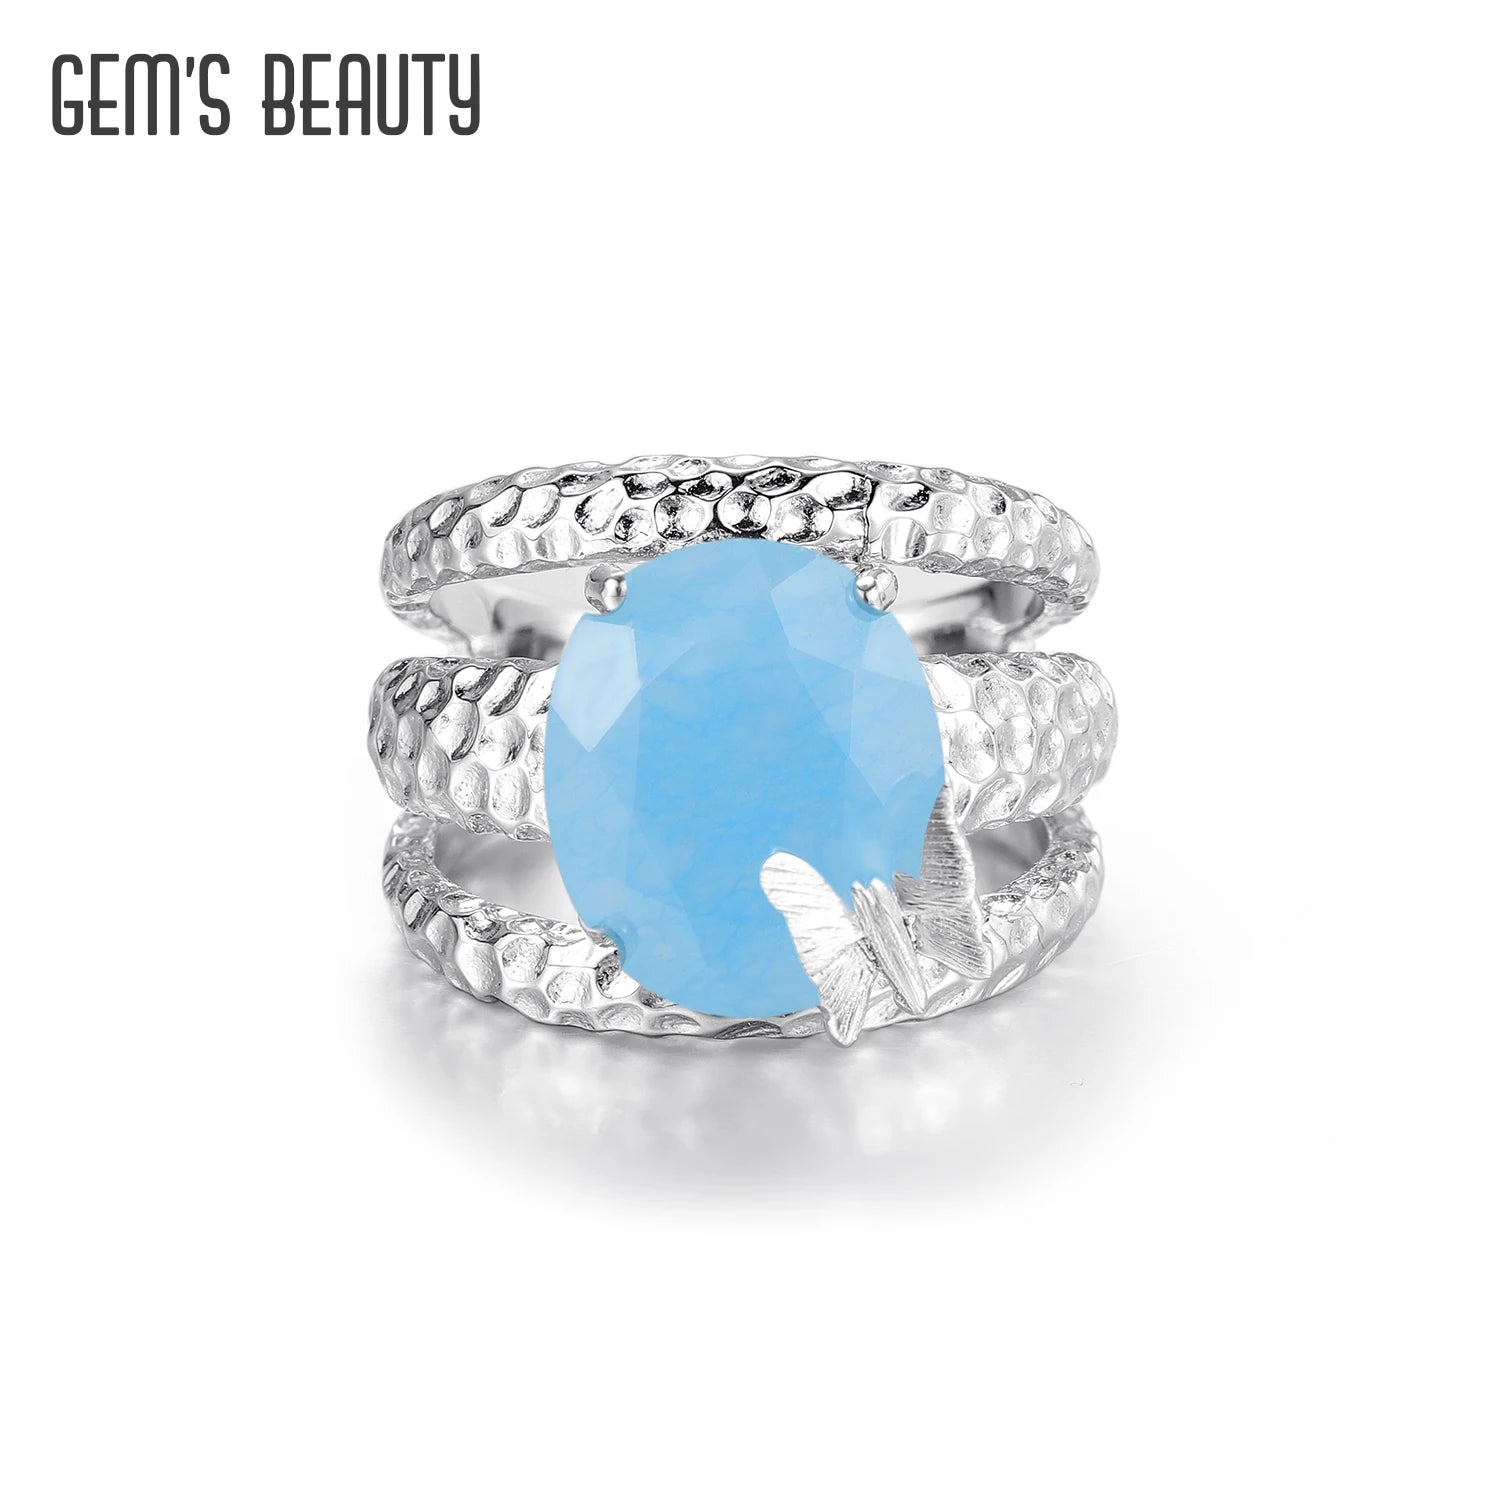 GEM'S BALLET Natural Aqua-blue Calcedony Gemstone Statement Ring Boho Sterling Silver Butterfly Ring Fine Jewelry Gift For Mom